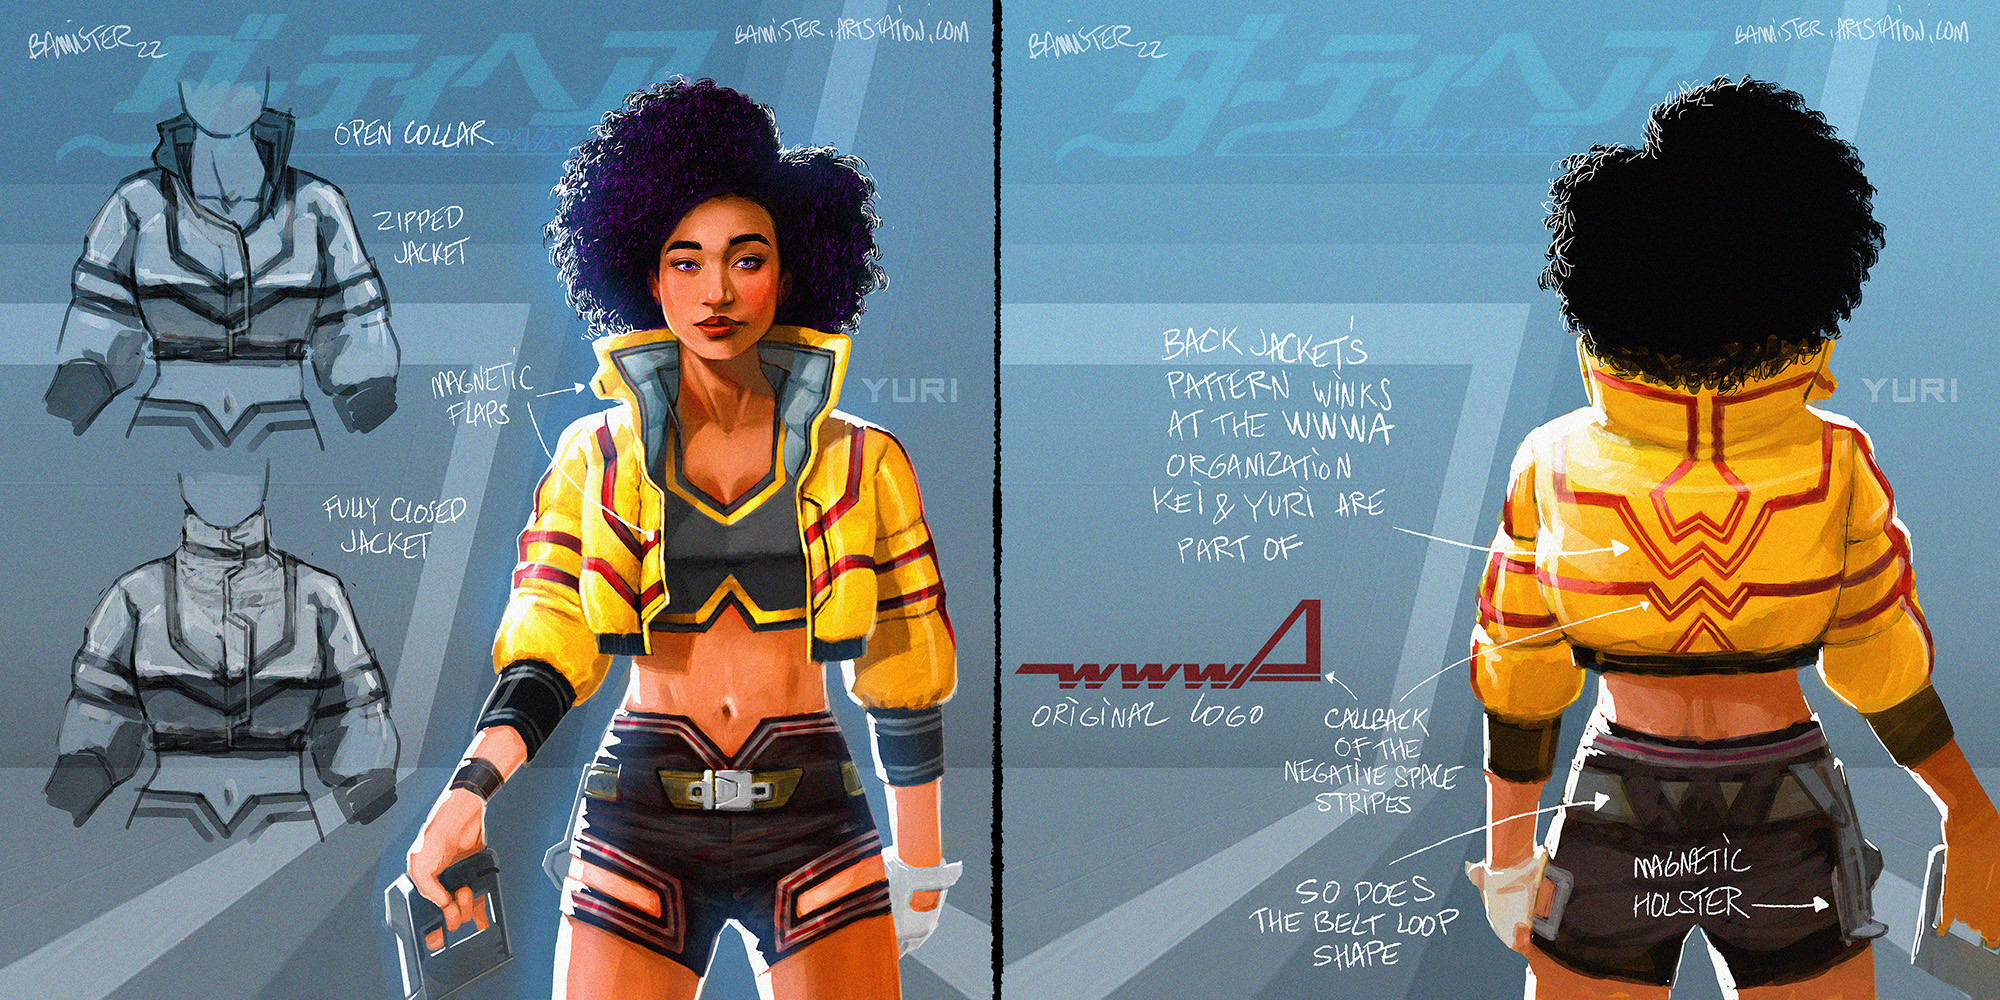 For Yuri's jacket, I kept the color code from the original one and made it a puffer bomber to contrast with the shorts she's wearing.
Nothing to sosphisticated, easily readable, with a hint of scifi/cyberpunk vibe (bevels and such recognizable shapes).